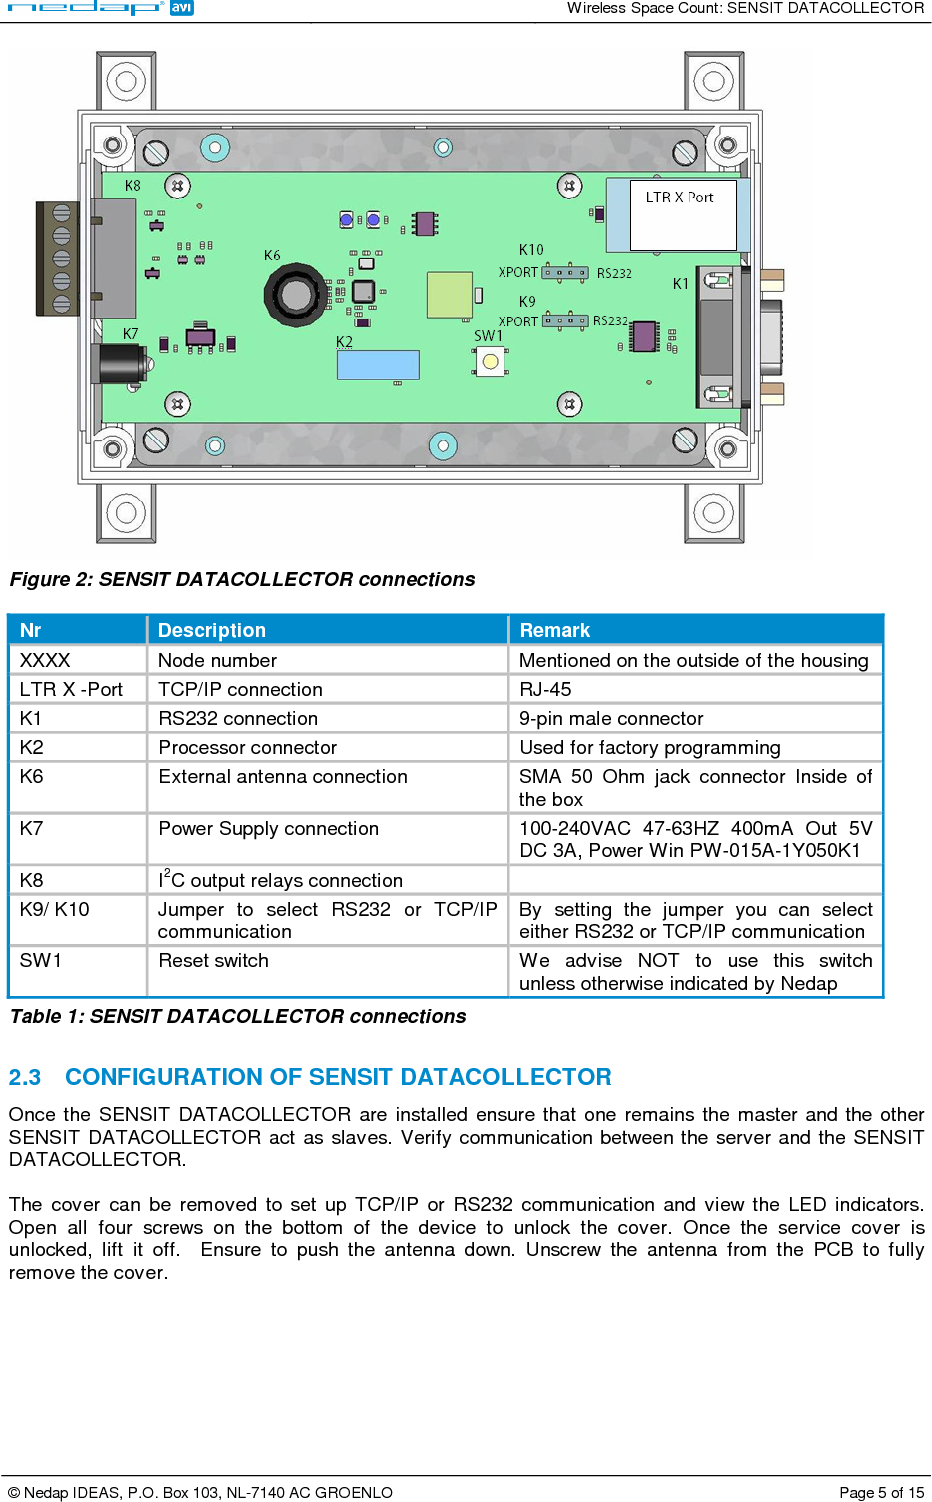   Wireless Space Count: SENSIT DATACOLLECTOR  © Nedap IDEAS, P.O. Box 103, NL-7140 AC GROENLO  Page 5 of 15   Figure 2: SENSIT DATACOLLECTOR connections  Nr  Description  Remark XXXX  Node number  Mentioned on the outside of the housing LTR X -Port  TCP/IP connection   RJ-45 K1  RS232 connection  9-pin male connector  K2  Processor connector  Used for factory programming K6  External antenna connection  SMA  50  Ohm  jack  connector  Inside  of the box K7  Power Supply connection  100-240VAC  47-63HZ  400mA  Out  5V DC 3A, Power Win PW-015A-1Y050K1 K8  I2C output relays connection    K9/ K10  Jumper  to  select  RS232  or  TCP/IP communication By  setting  the  jumper  you  can  select either RS232 or TCP/IP communication SW1  Reset switch  We  advise  NOT  to  use  this  switch unless otherwise indicated by Nedap Table 1: SENSIT DATACOLLECTOR connections  2.3  CONFIGURATION OF SENSIT DATACOLLECTOR Once  the  SENSIT  DATACOLLECTOR are installed  ensure that  one  remains  the  master and  the other SENSIT  DATACOLLECTOR  act as  slaves. Verify communication between the server and the SENSIT DATACOLLECTOR.   The  cover  can  be  removed  to  set  up  TCP/IP  or  RS232  communication  and  view  the  LED  indicators. Open  all  four  screws  on  the  bottom  of  the  device  to  unlock  the  cover.  Once  the  service  cover  is unlocked,  lift  it  off.    Ensure  to  push  the  antenna  down.  Unscrew  the  antenna  from  the  PCB  to  fully remove the cover.    